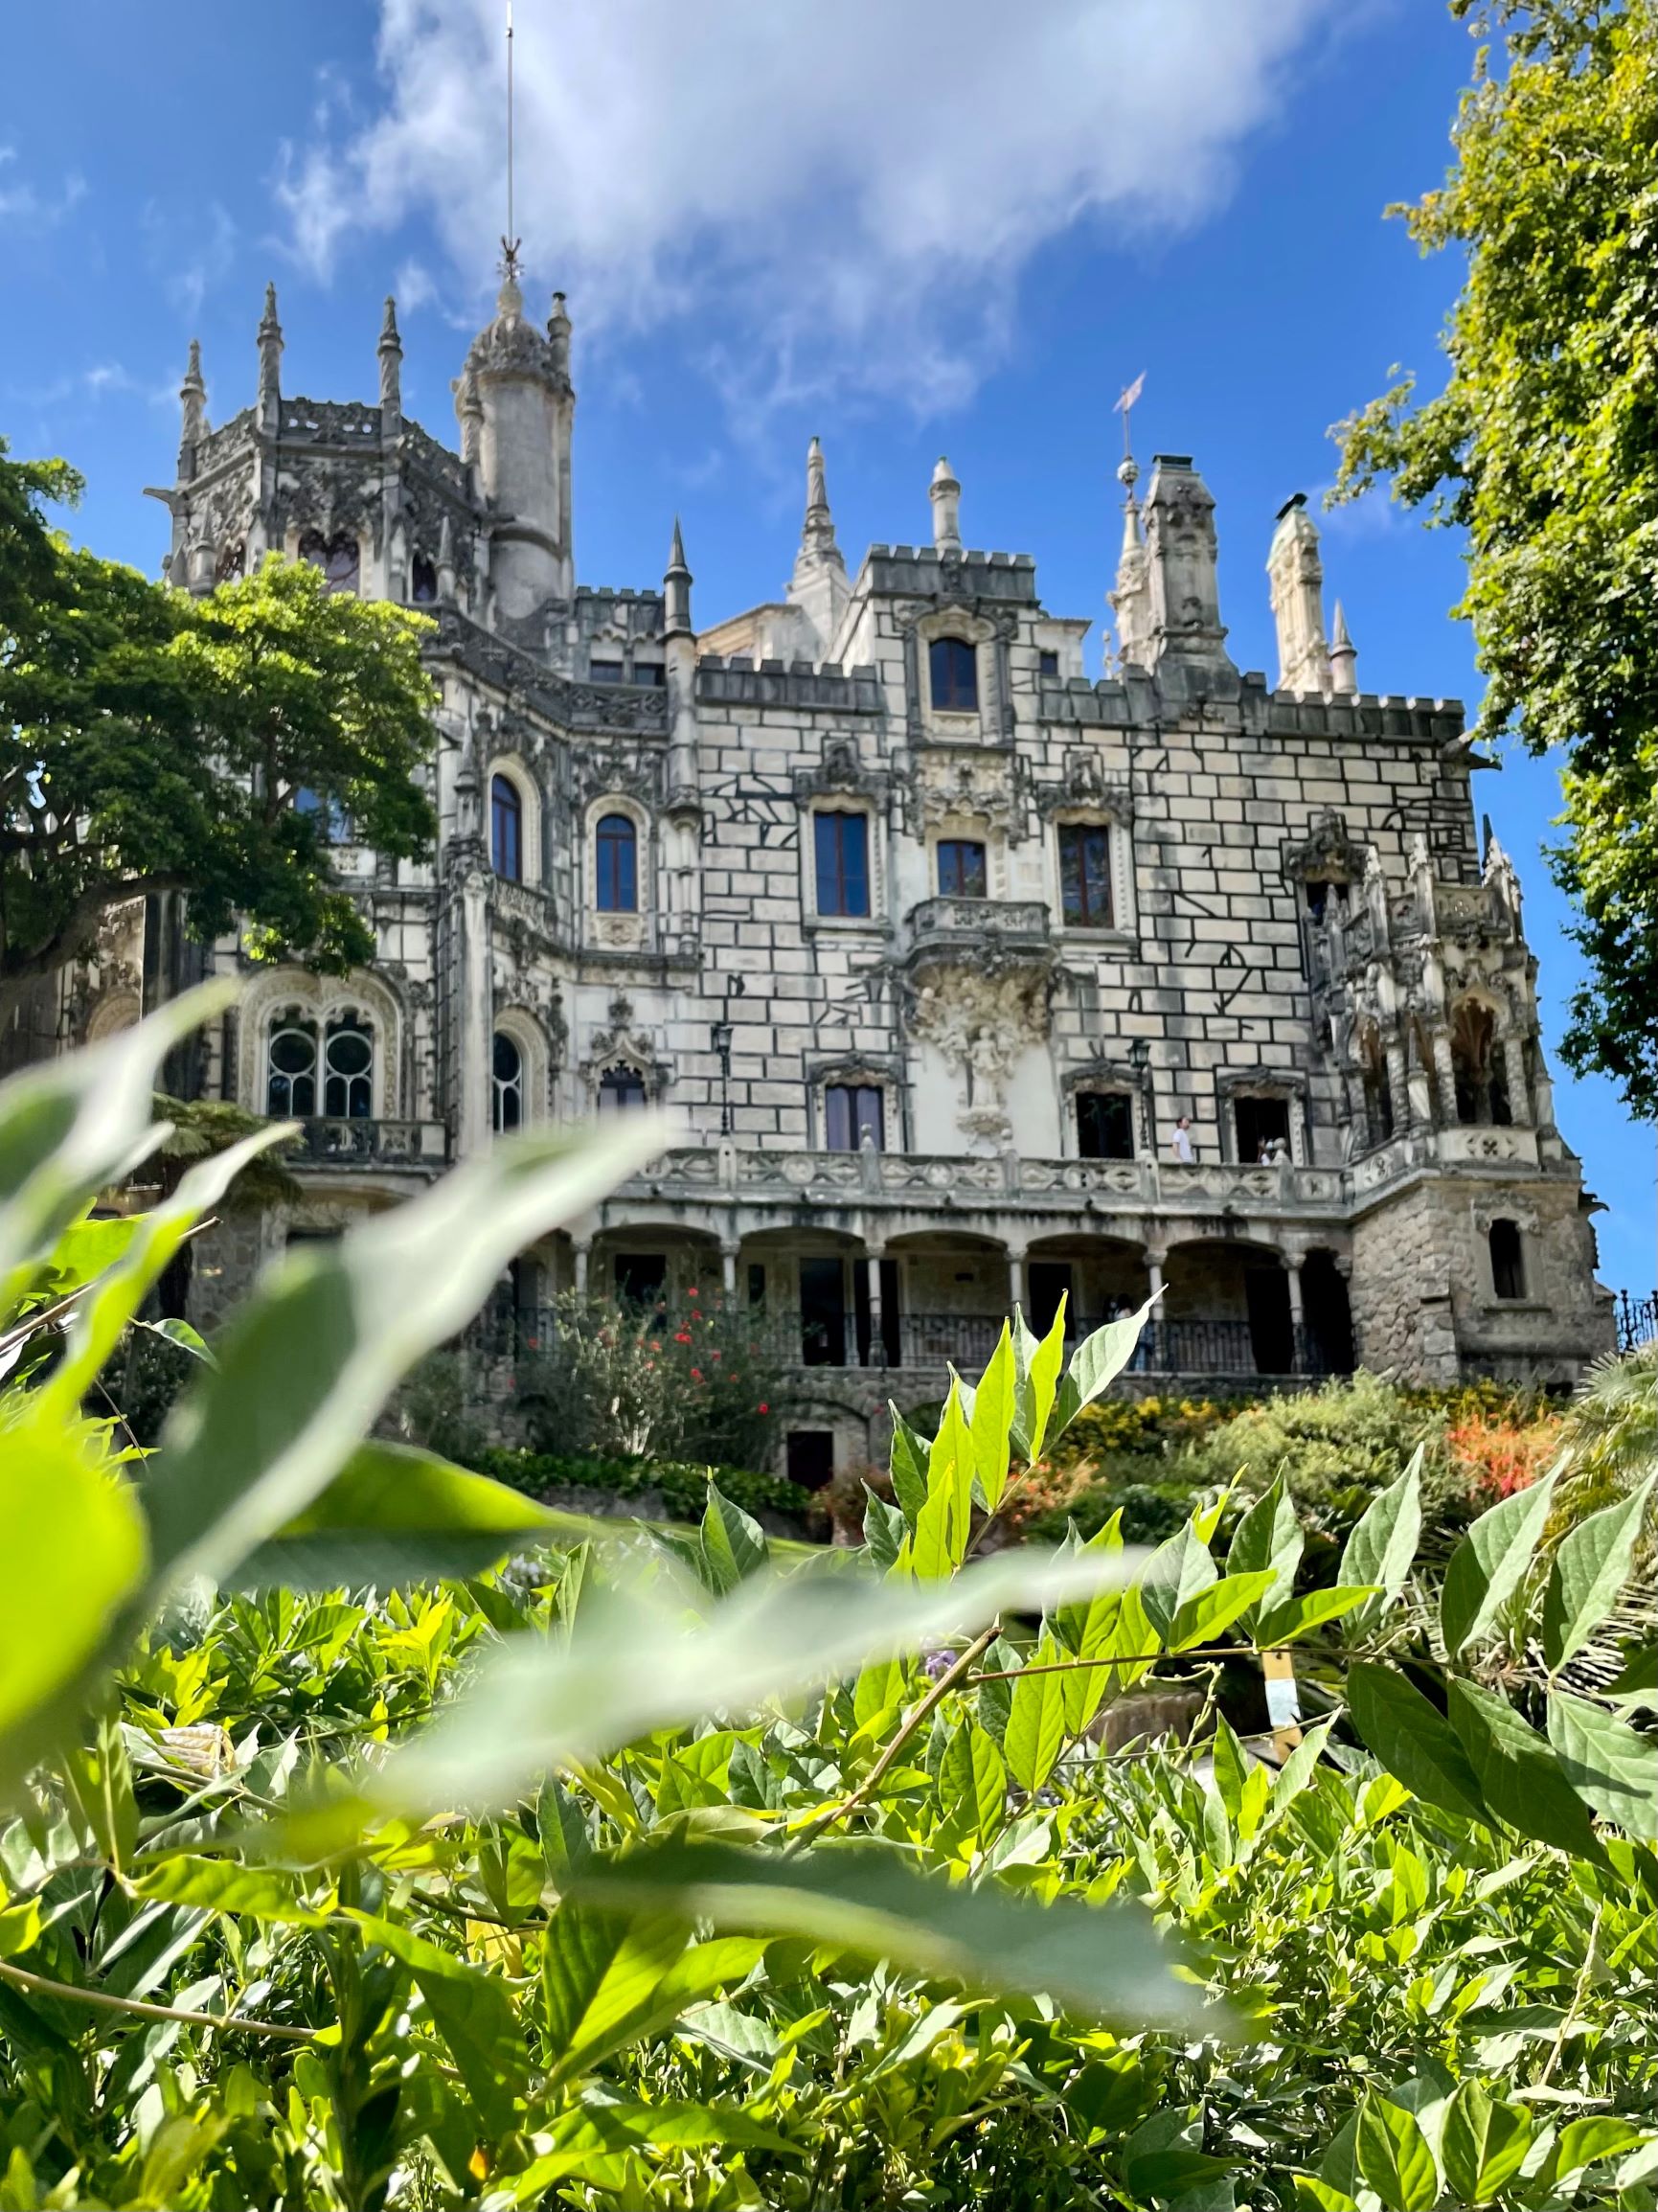 Quinta da Regaleira, Sintra, a palace in Sintra not to miss.